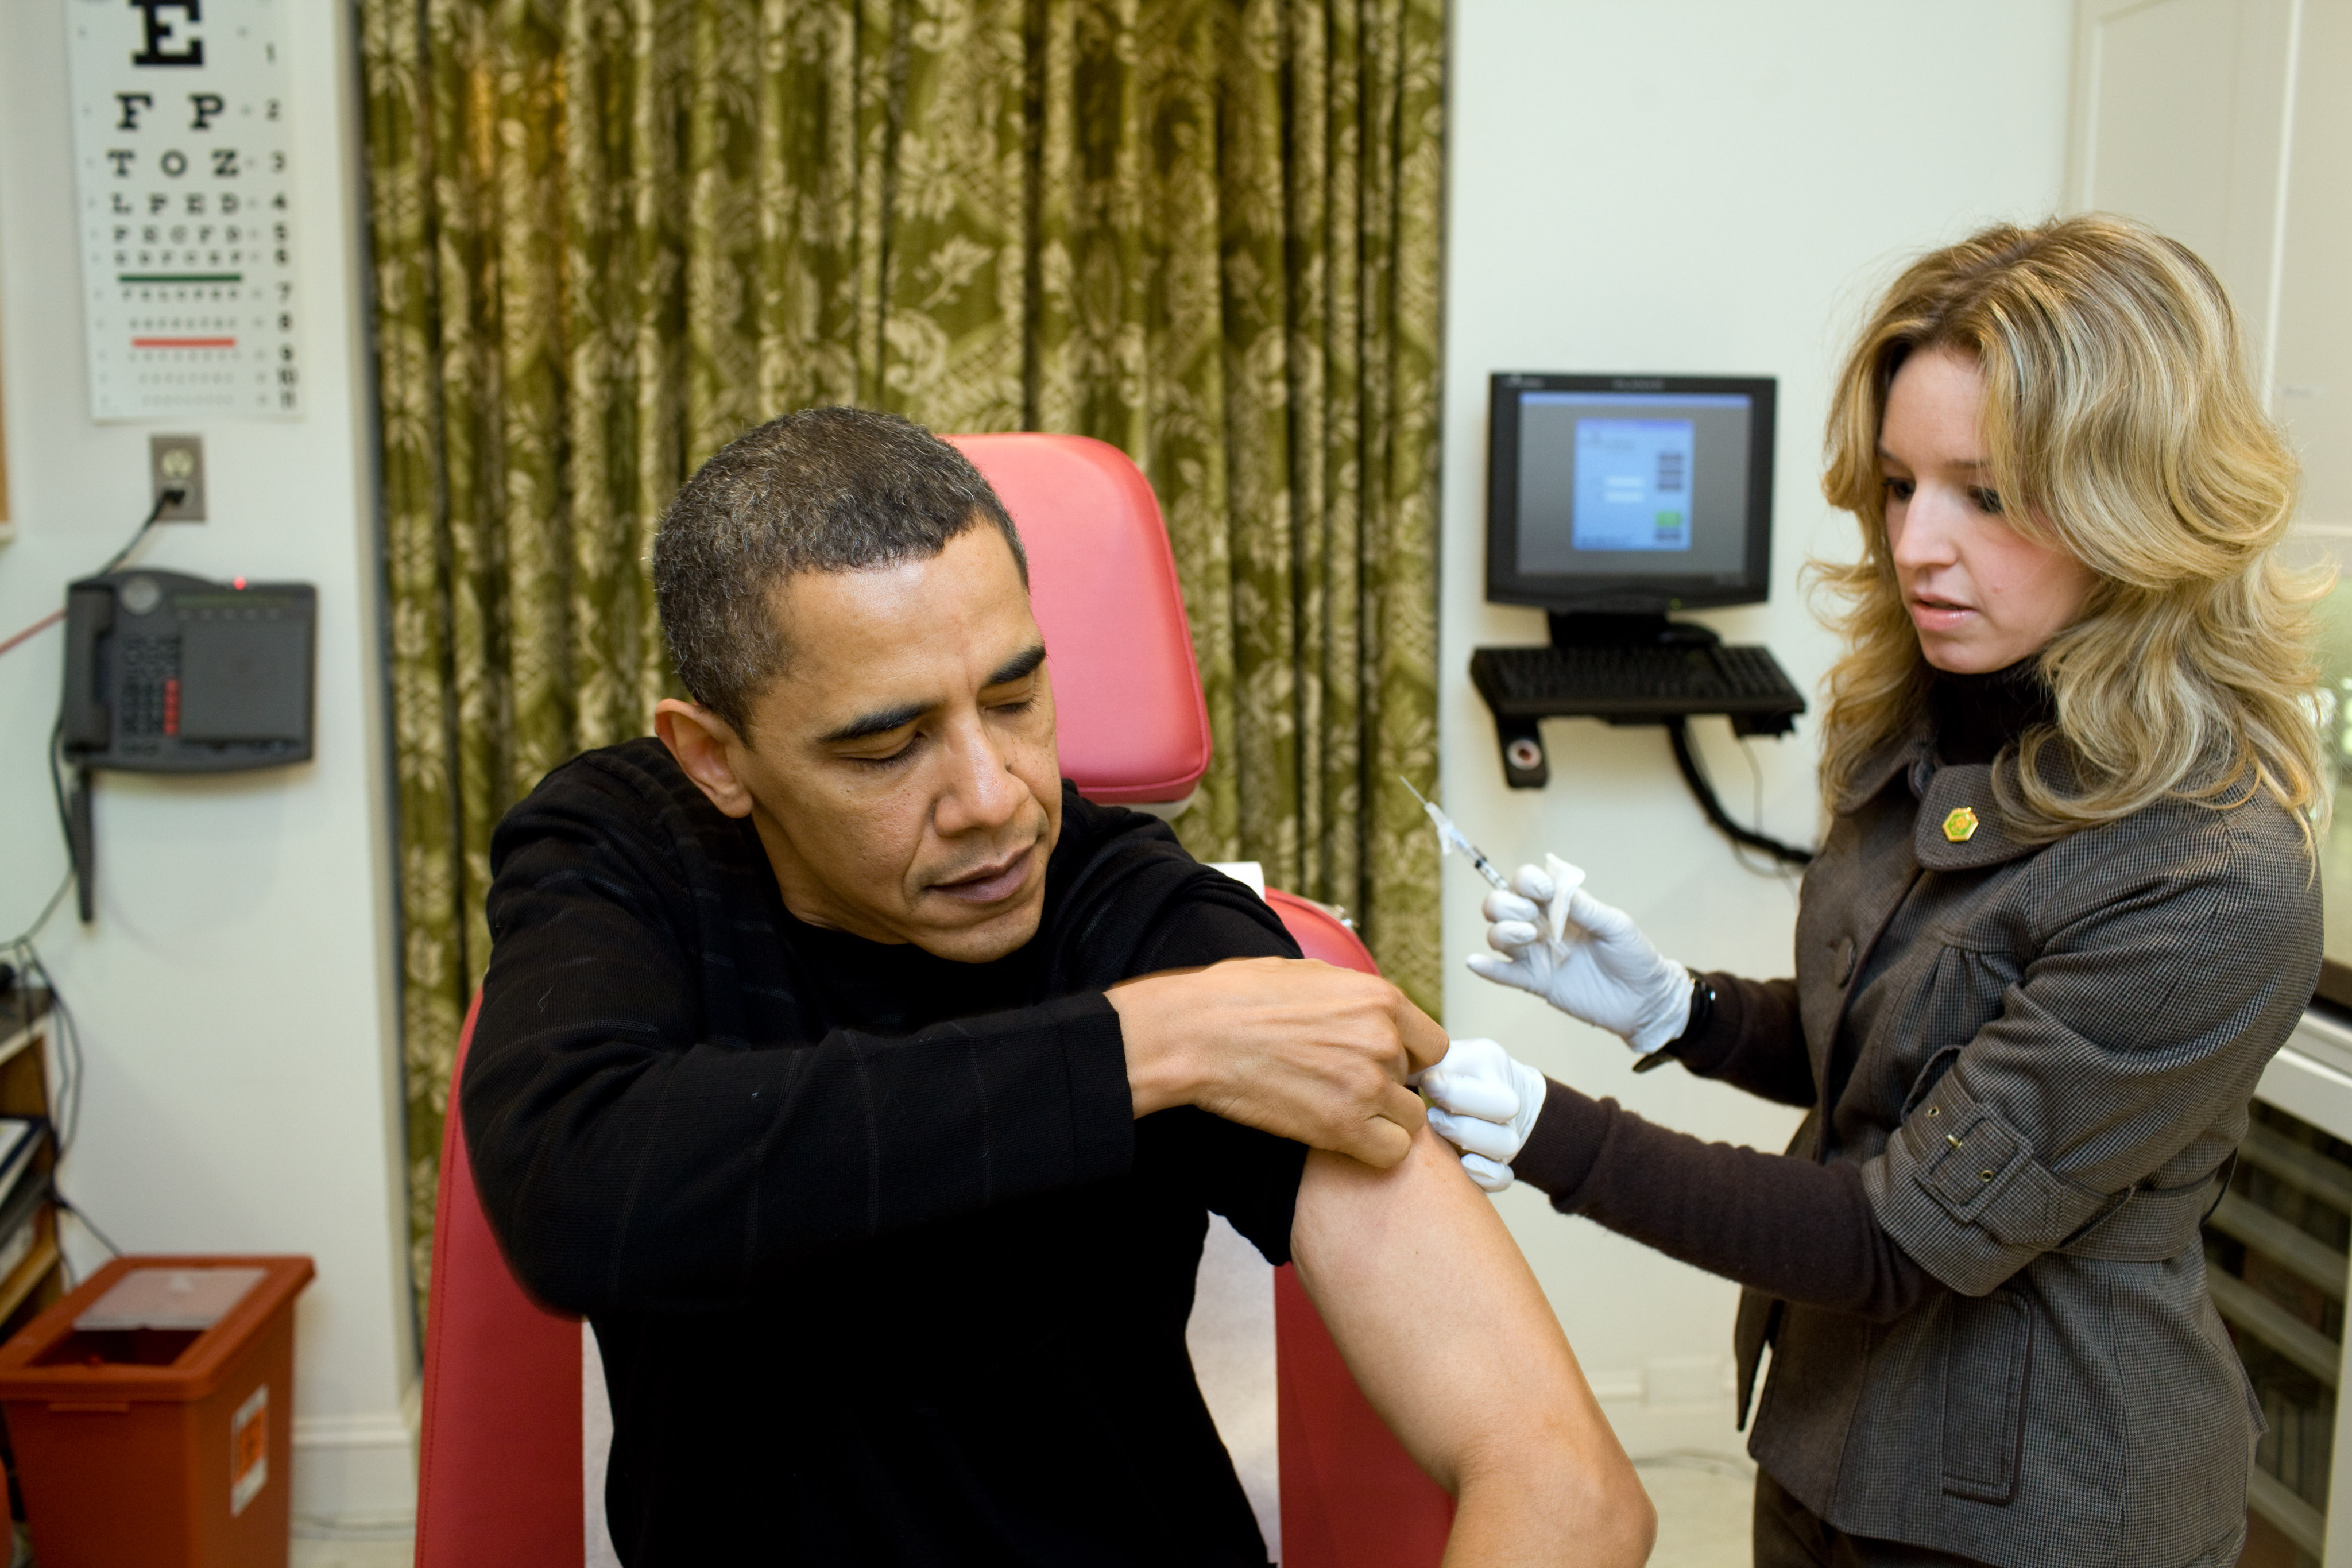 In this handout provided by the White House, A White House nurse prepares to administer the H1N1 vaccine to President Barack Obama at the White House on December 20, 2009 in Washington, DC. (Pete Souza—White House/Getty Images)